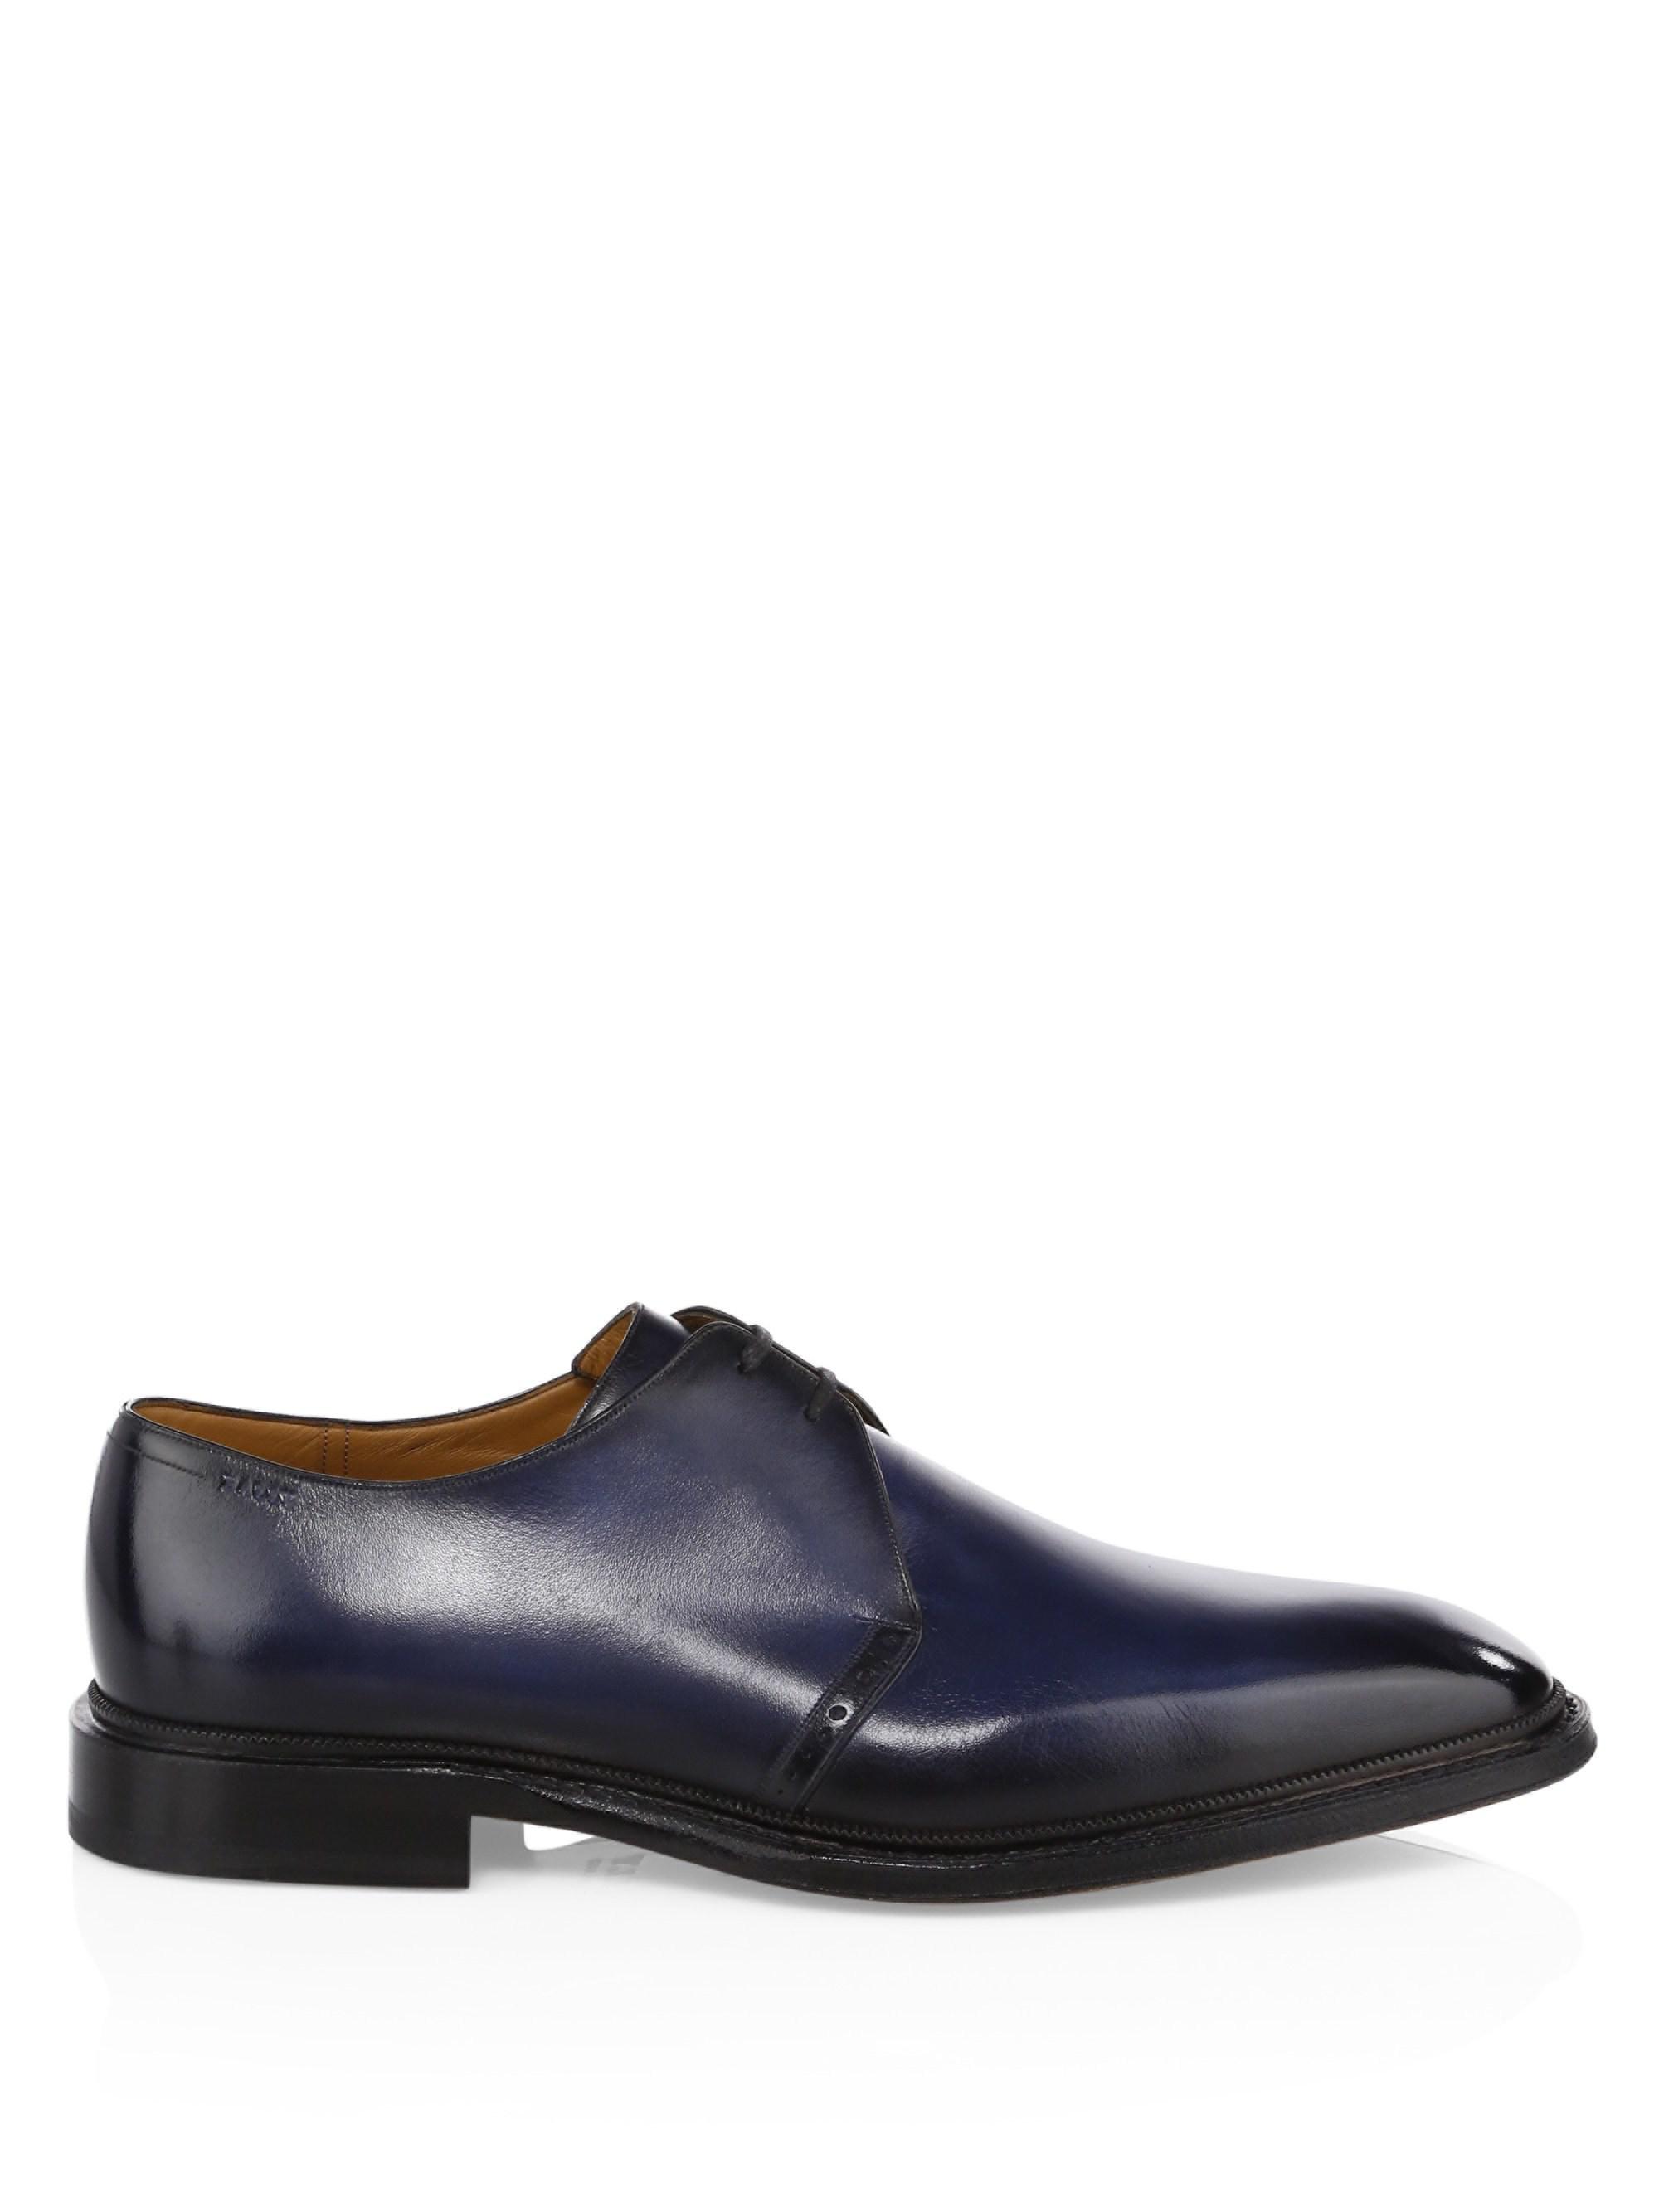 Bally Skamburge Two Eyelet Lace Leather Dress Shoes in Blue for Men - Lyst